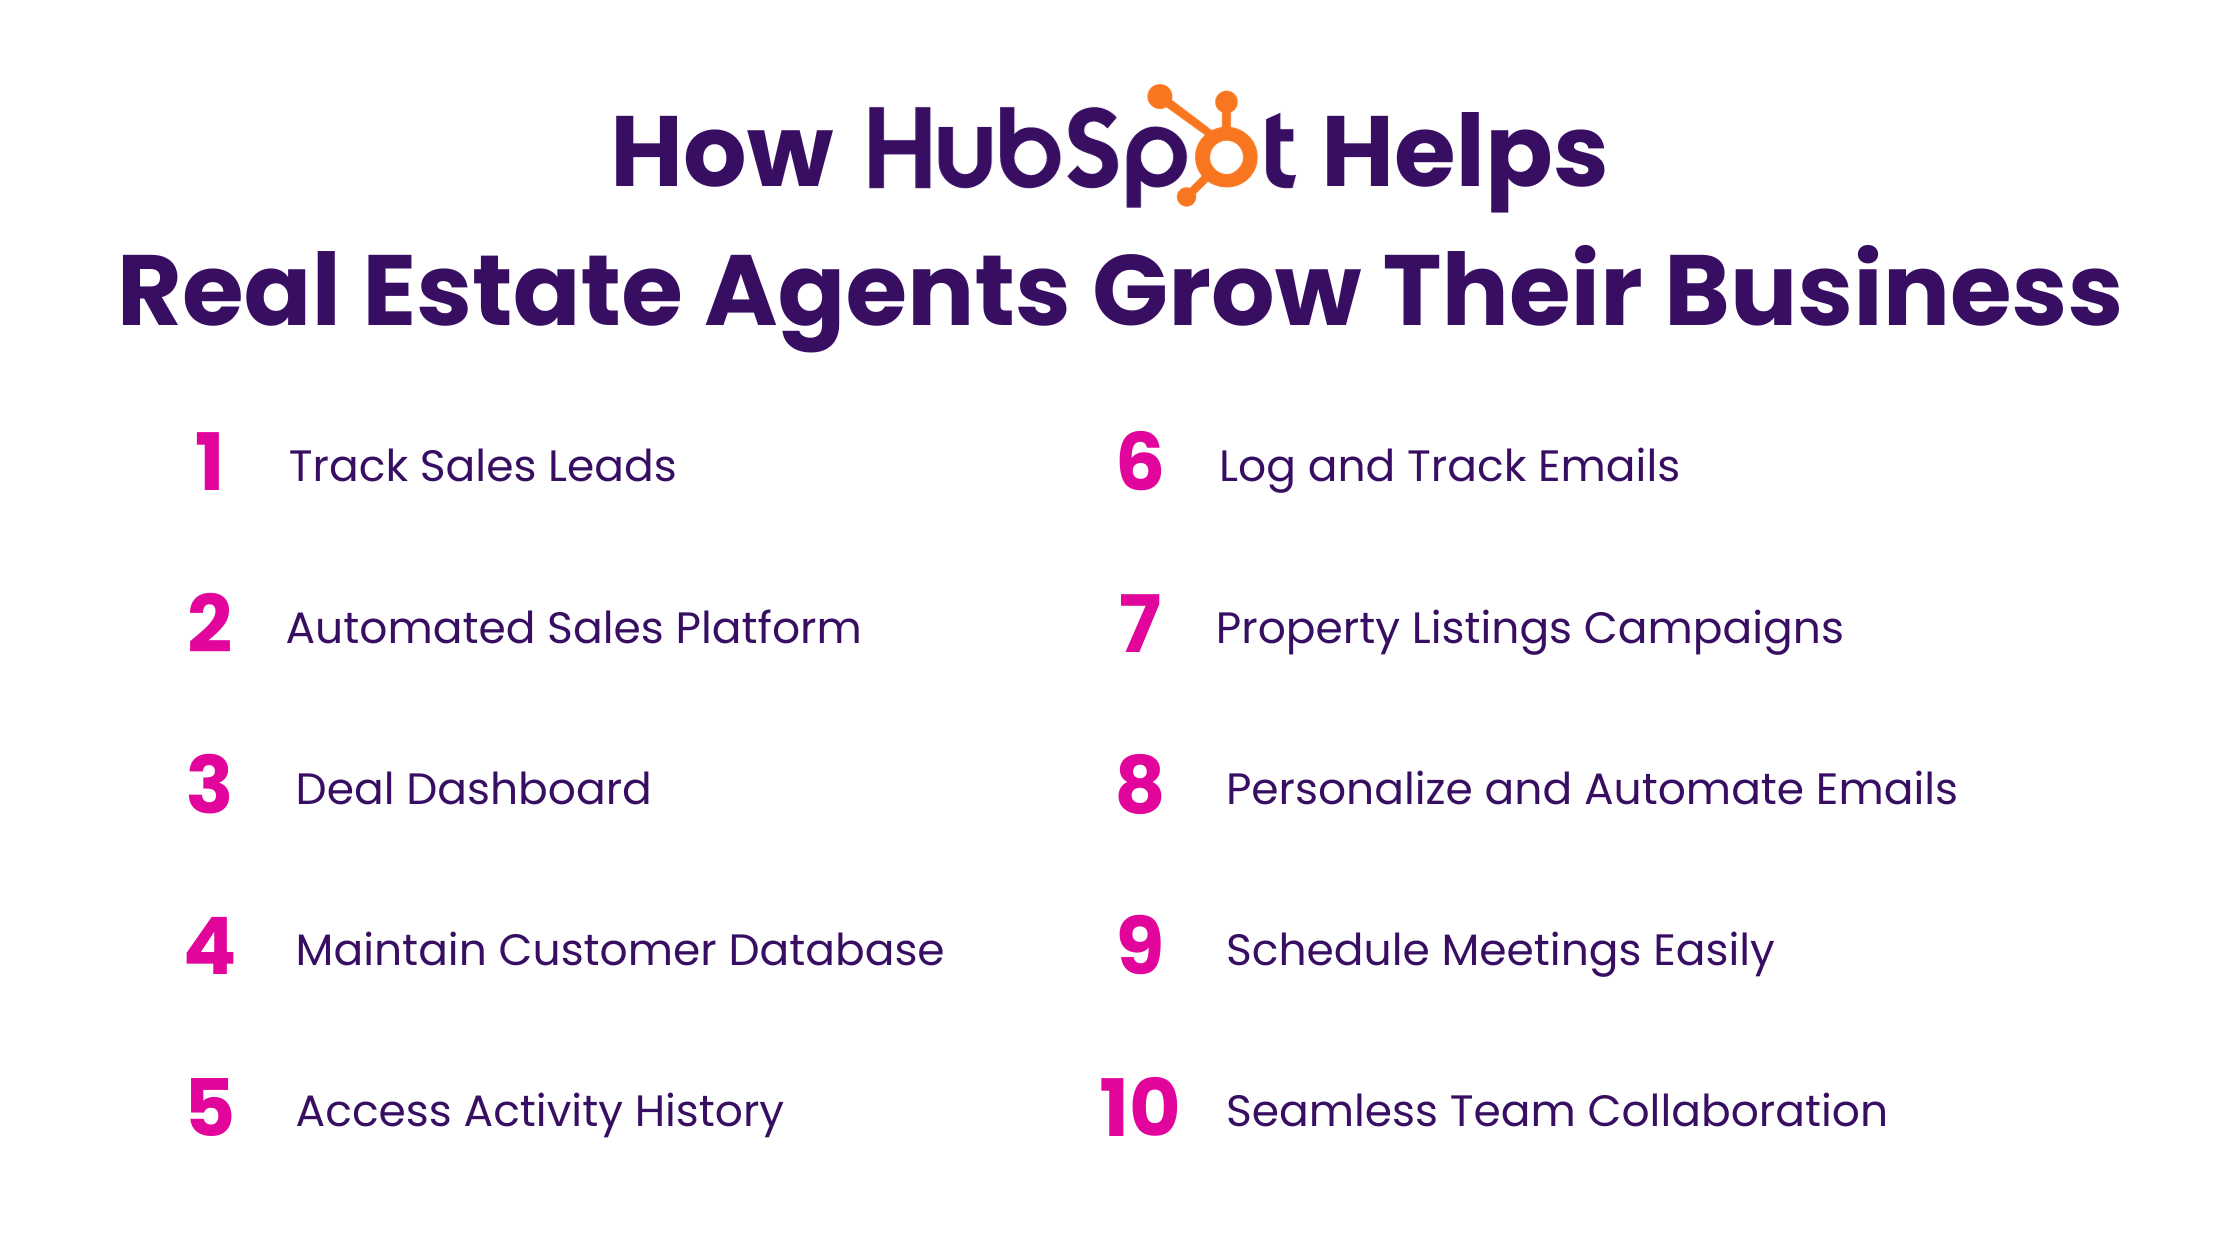 How HubSpot Helps Real Estate Agents Grow Their Business